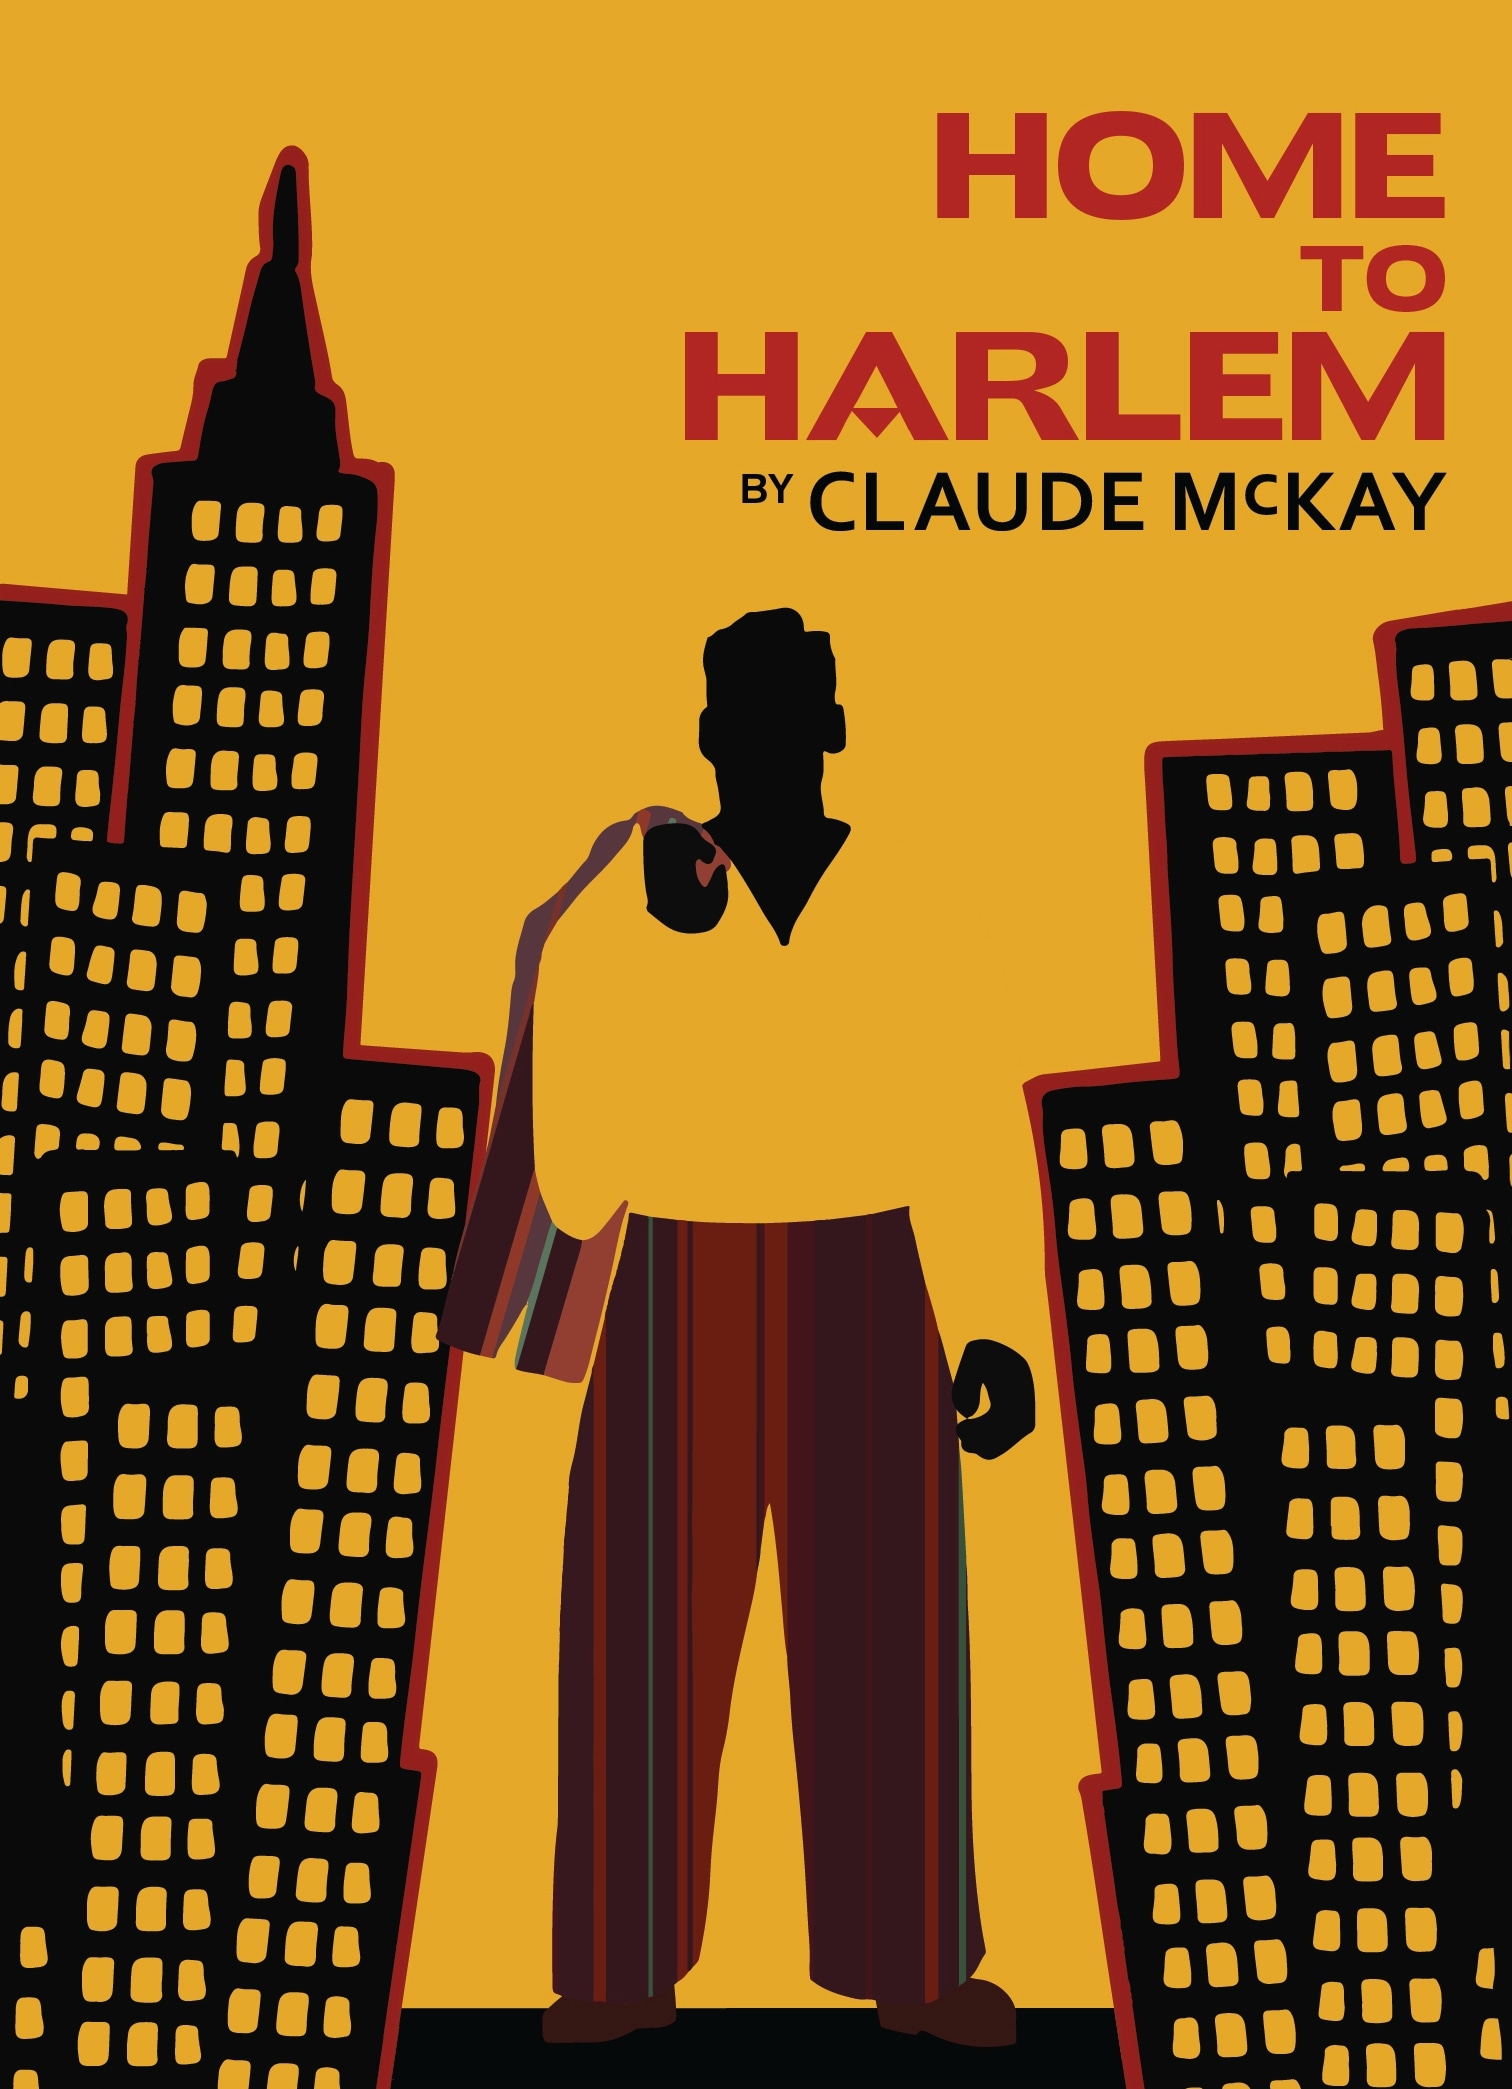 Book “Home to Harlem” by Claude McKay — September 29, 2022